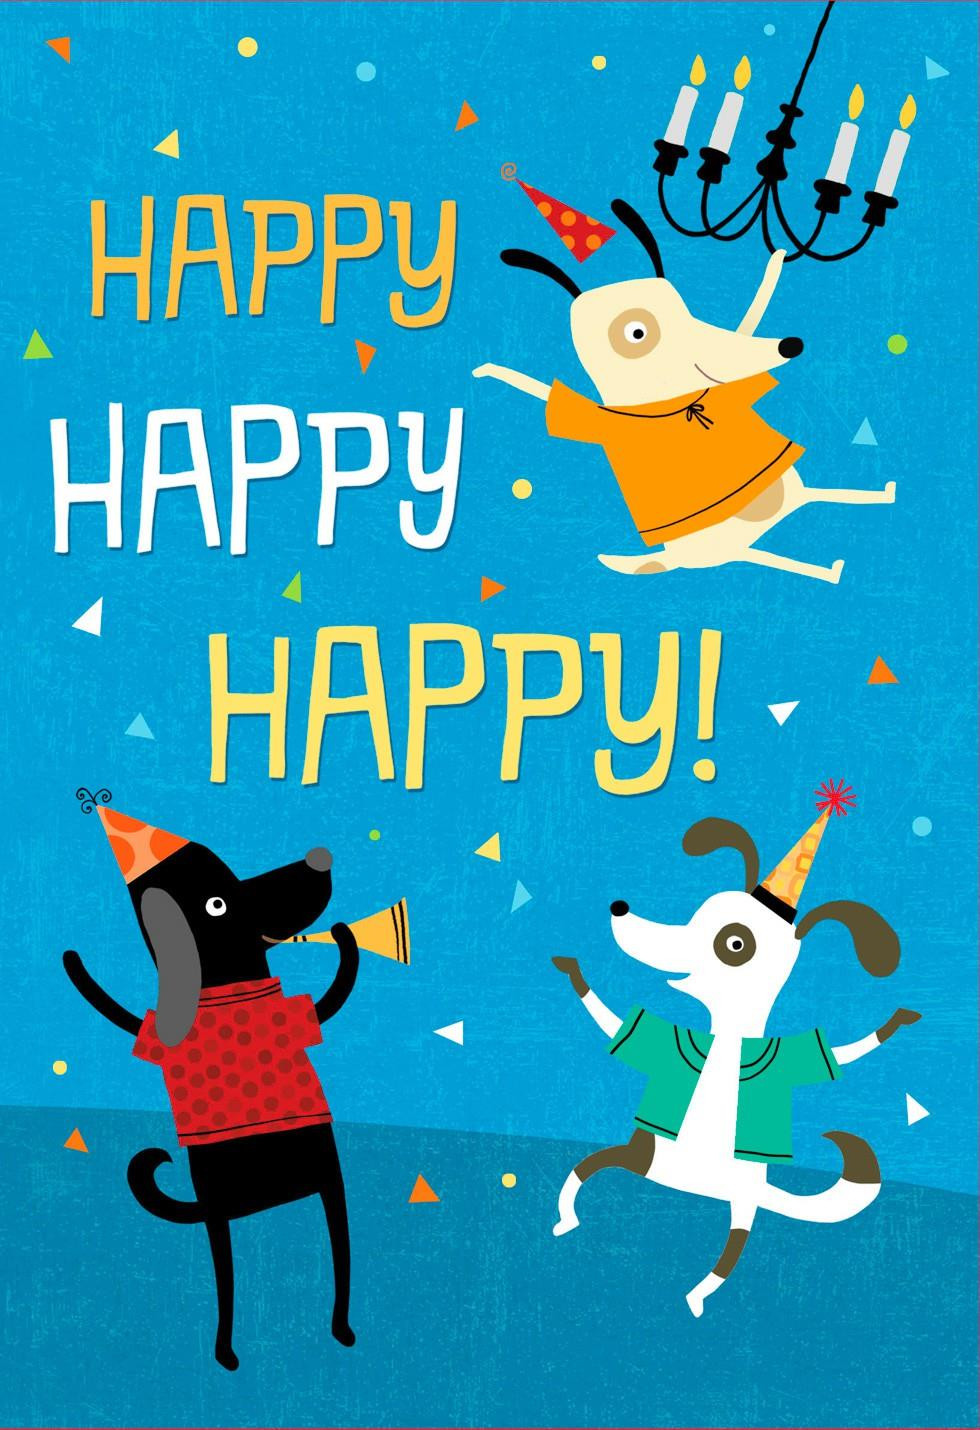 Free Online Birthday Cards With Music
 Who Let the Dogs Out Musical Birthday Card Greeting